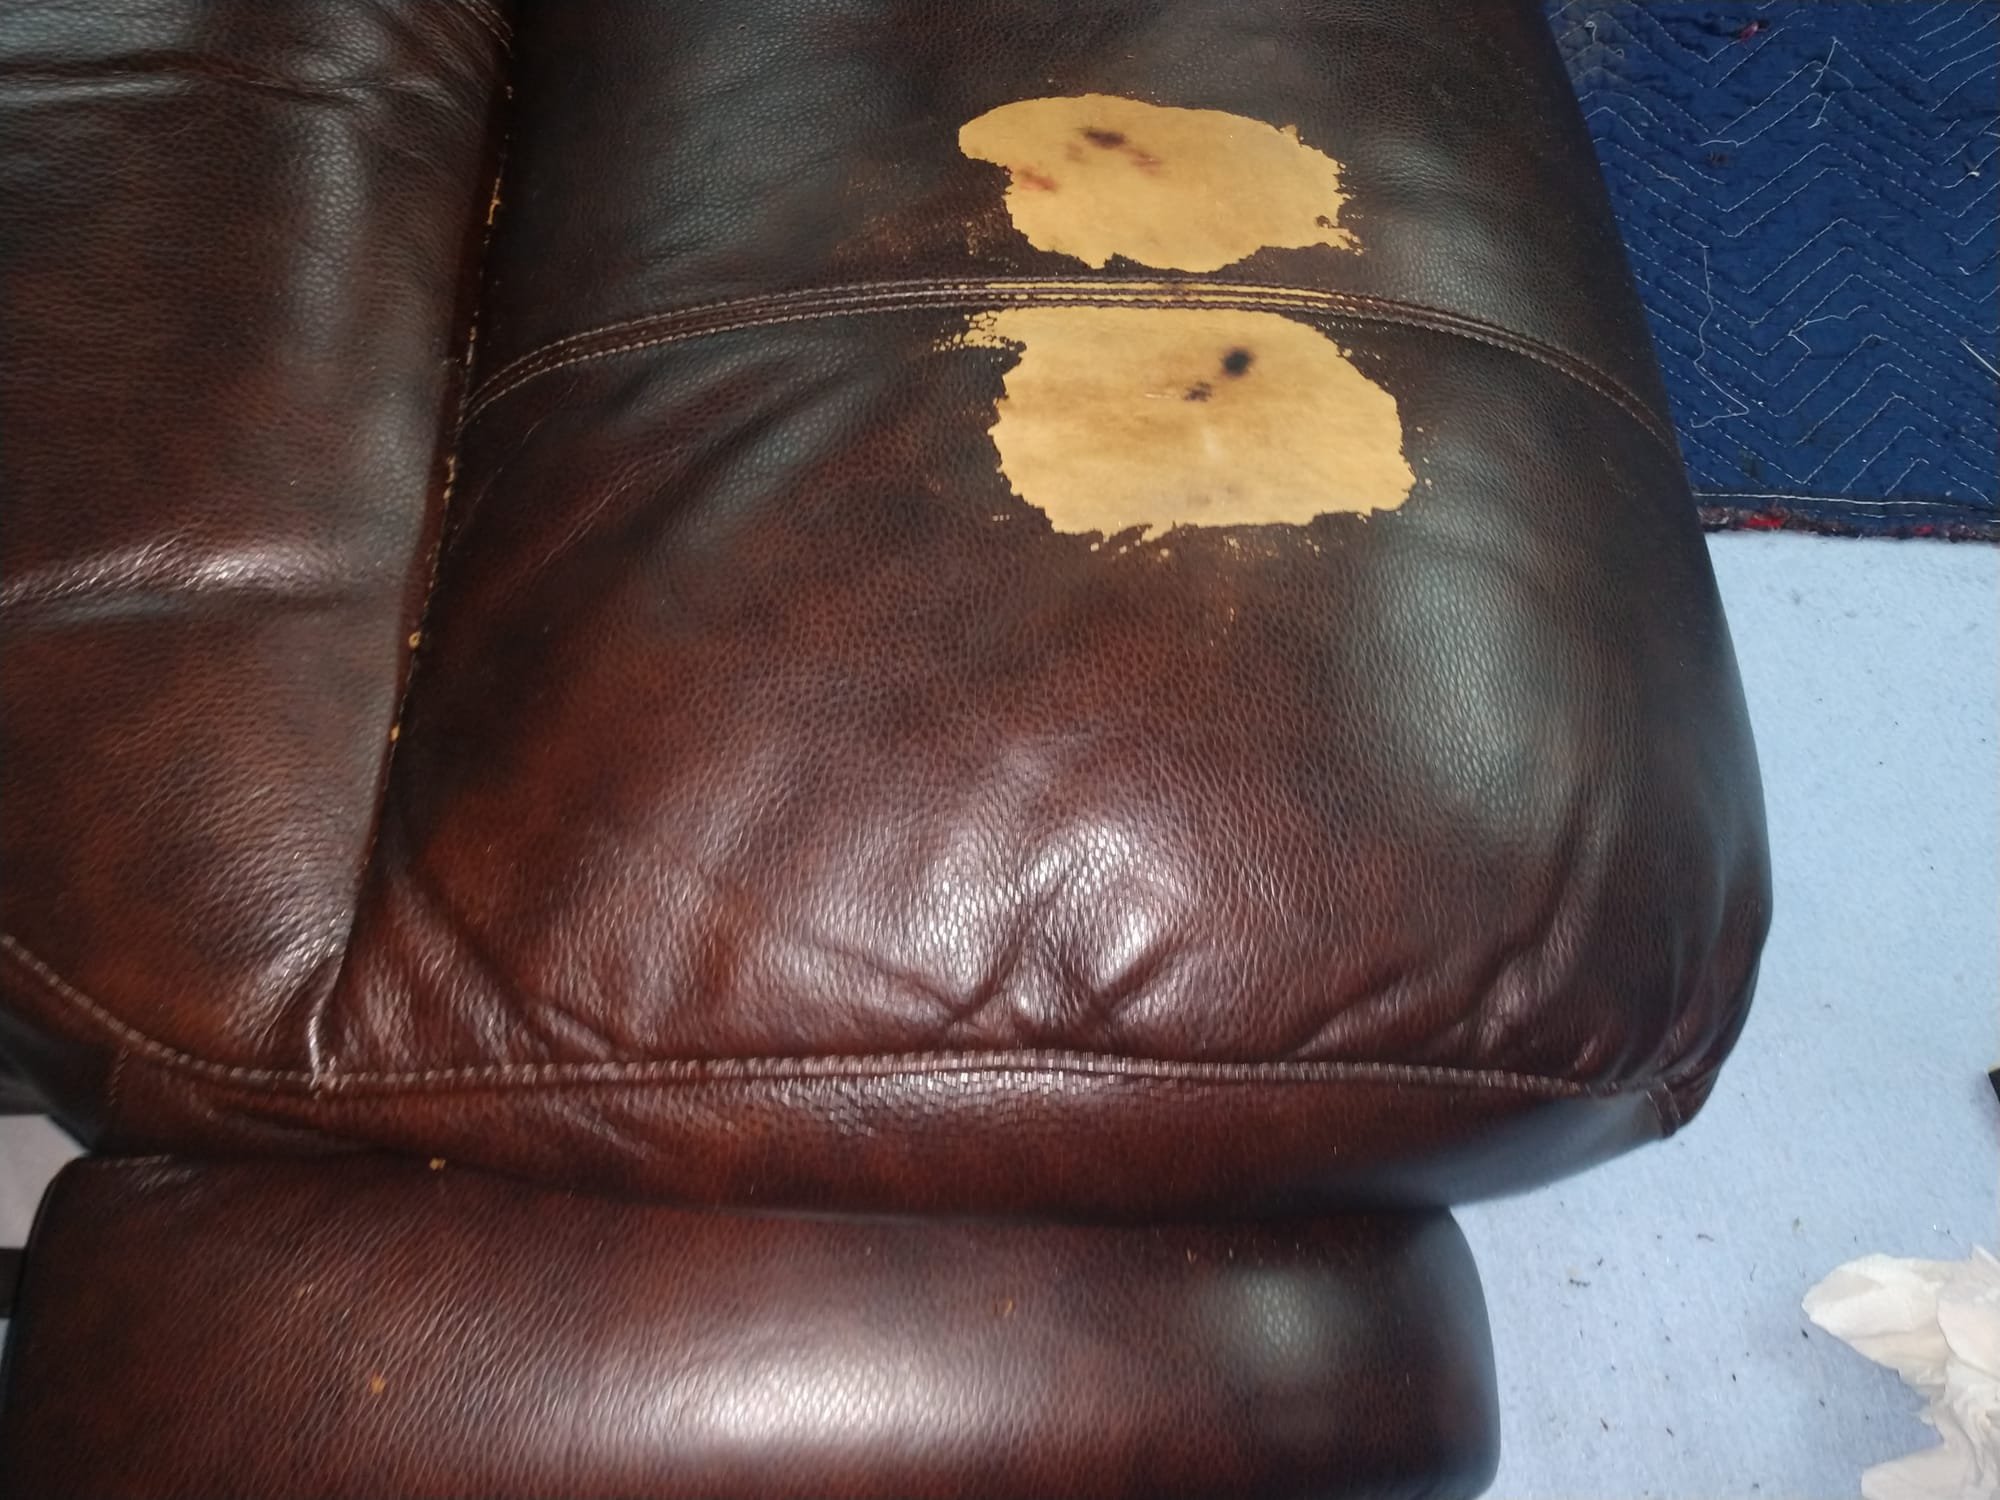 Furniture Repair In Charlotte Fix, Leather Couch Repair Charlotte Nc